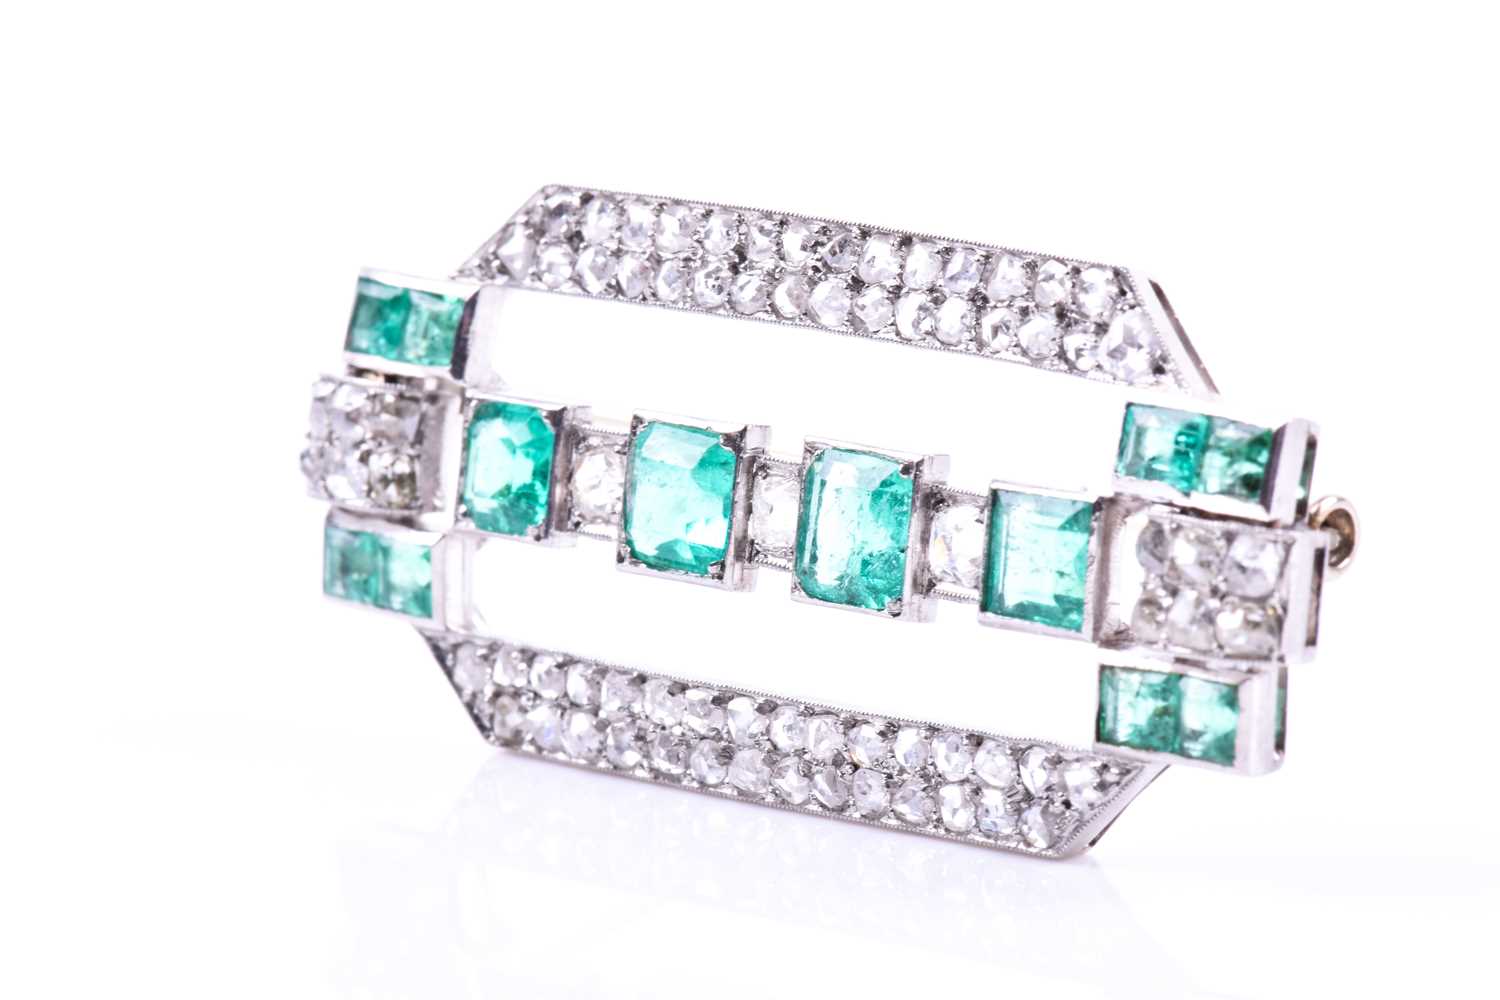 An Art Deco diamond and emerald broochthe rectangular mount inset with twelve emeralds (likely of - Image 3 of 5